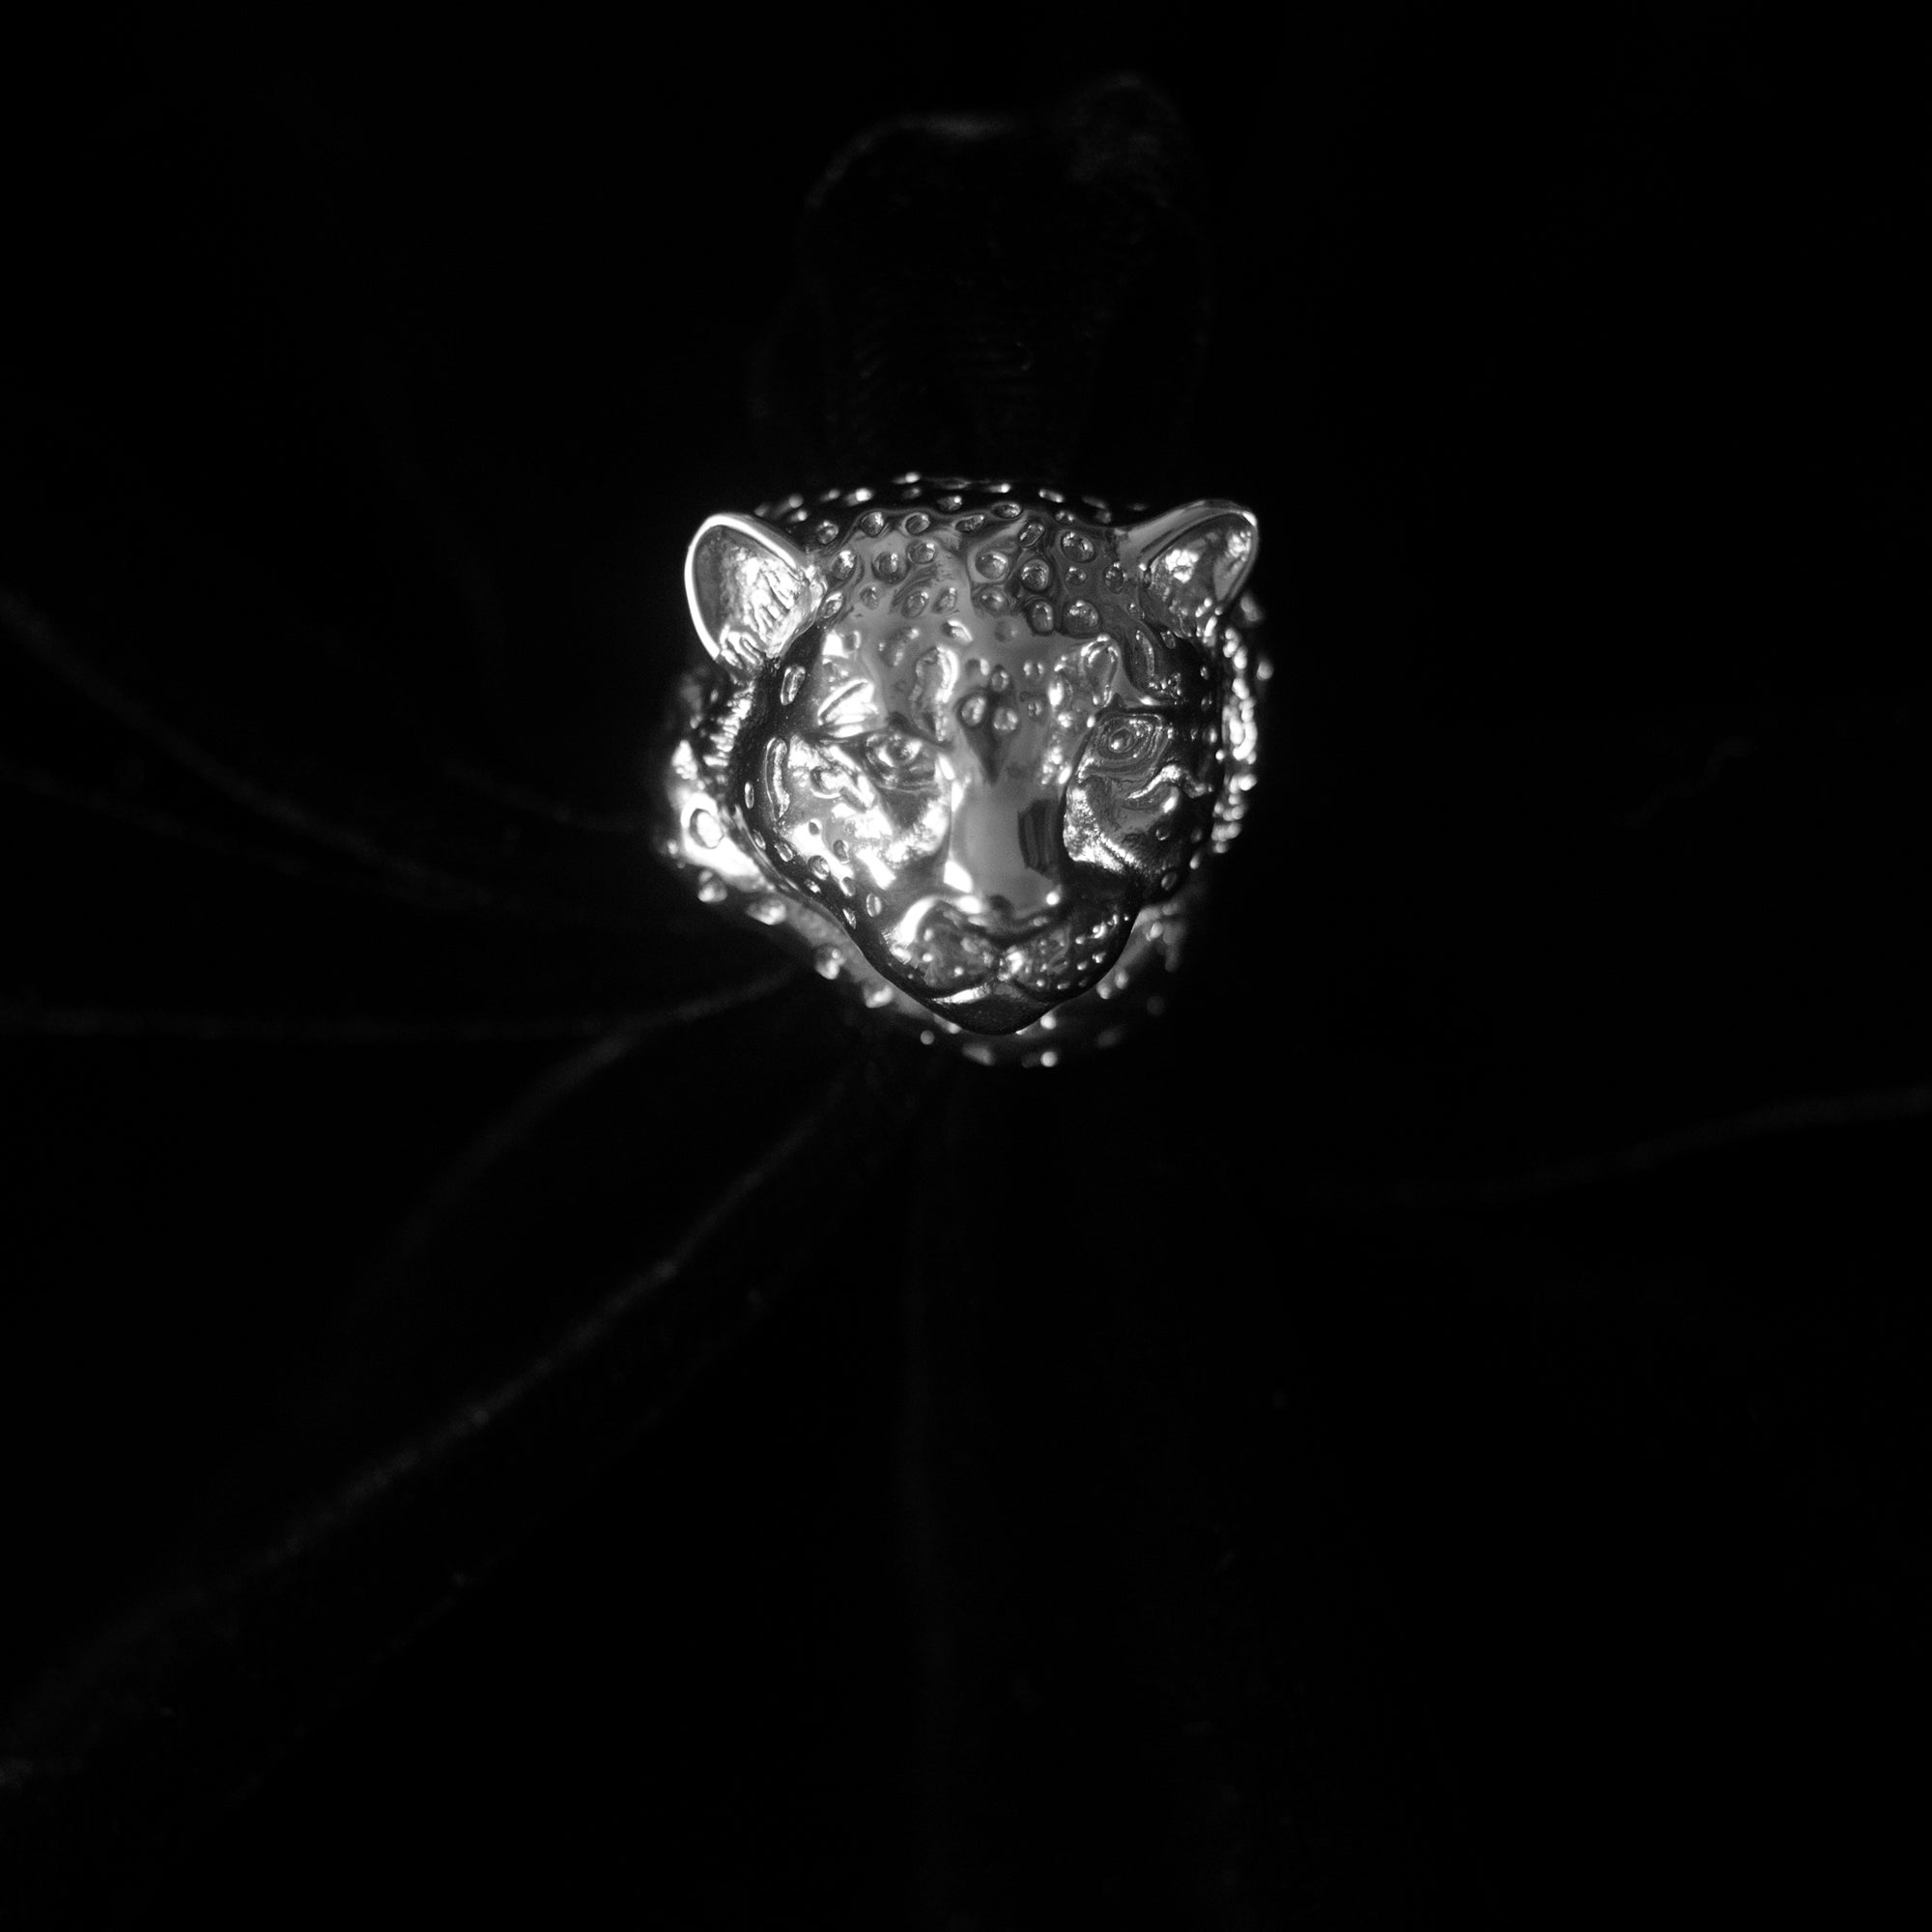 On a black background, sits a silver ring in the shape of a snow leopard.